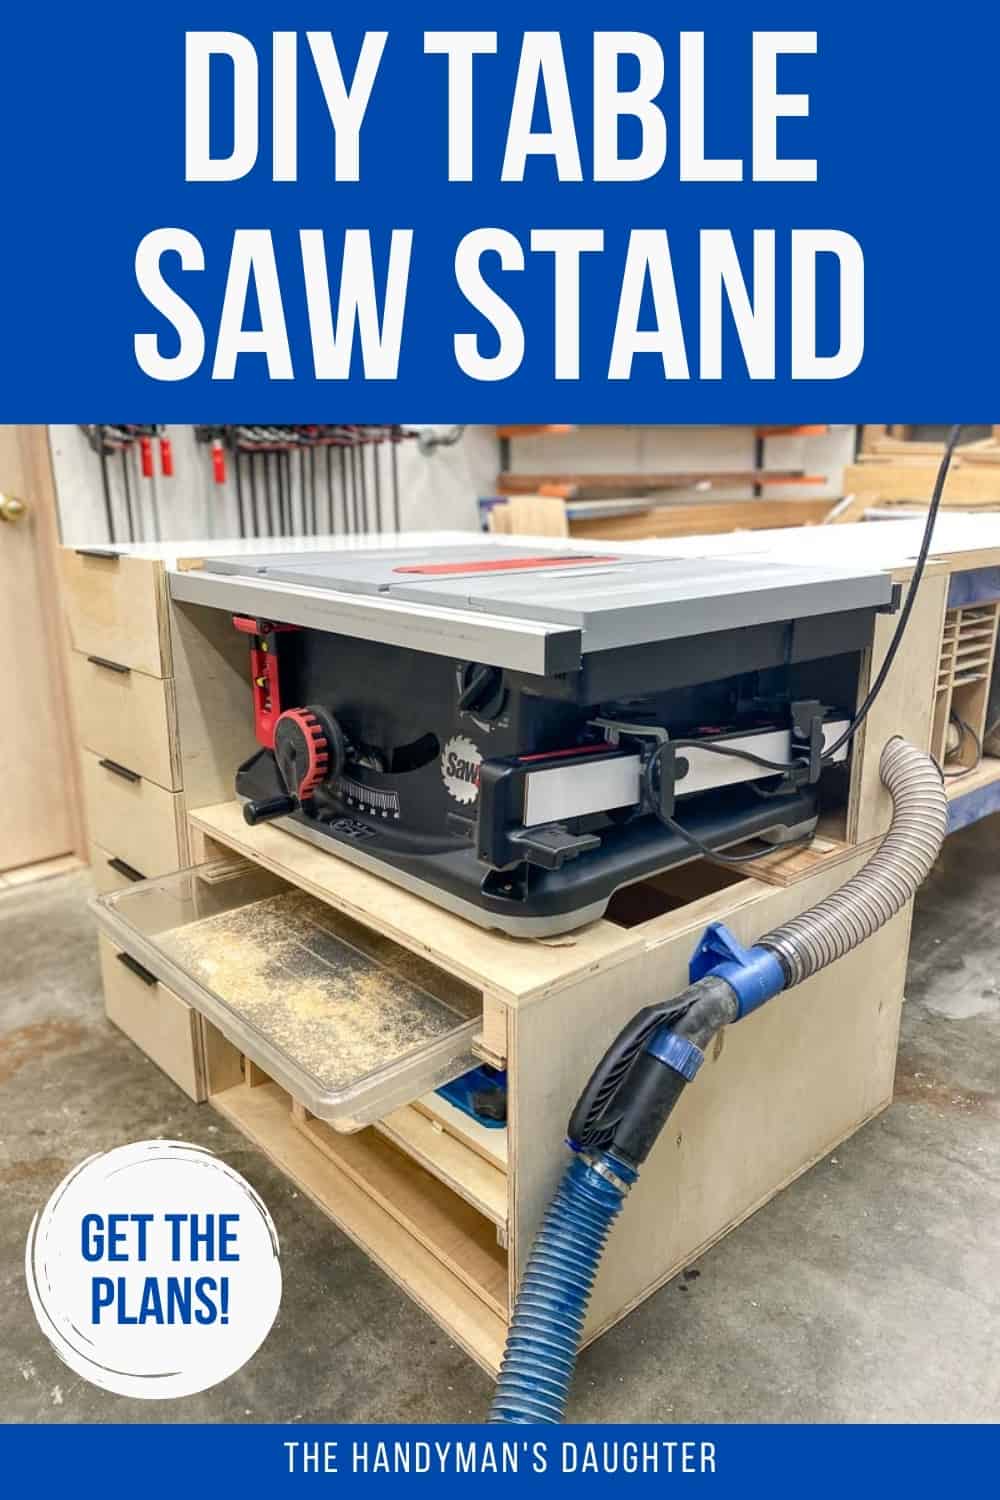 DIY table saw stand with plans